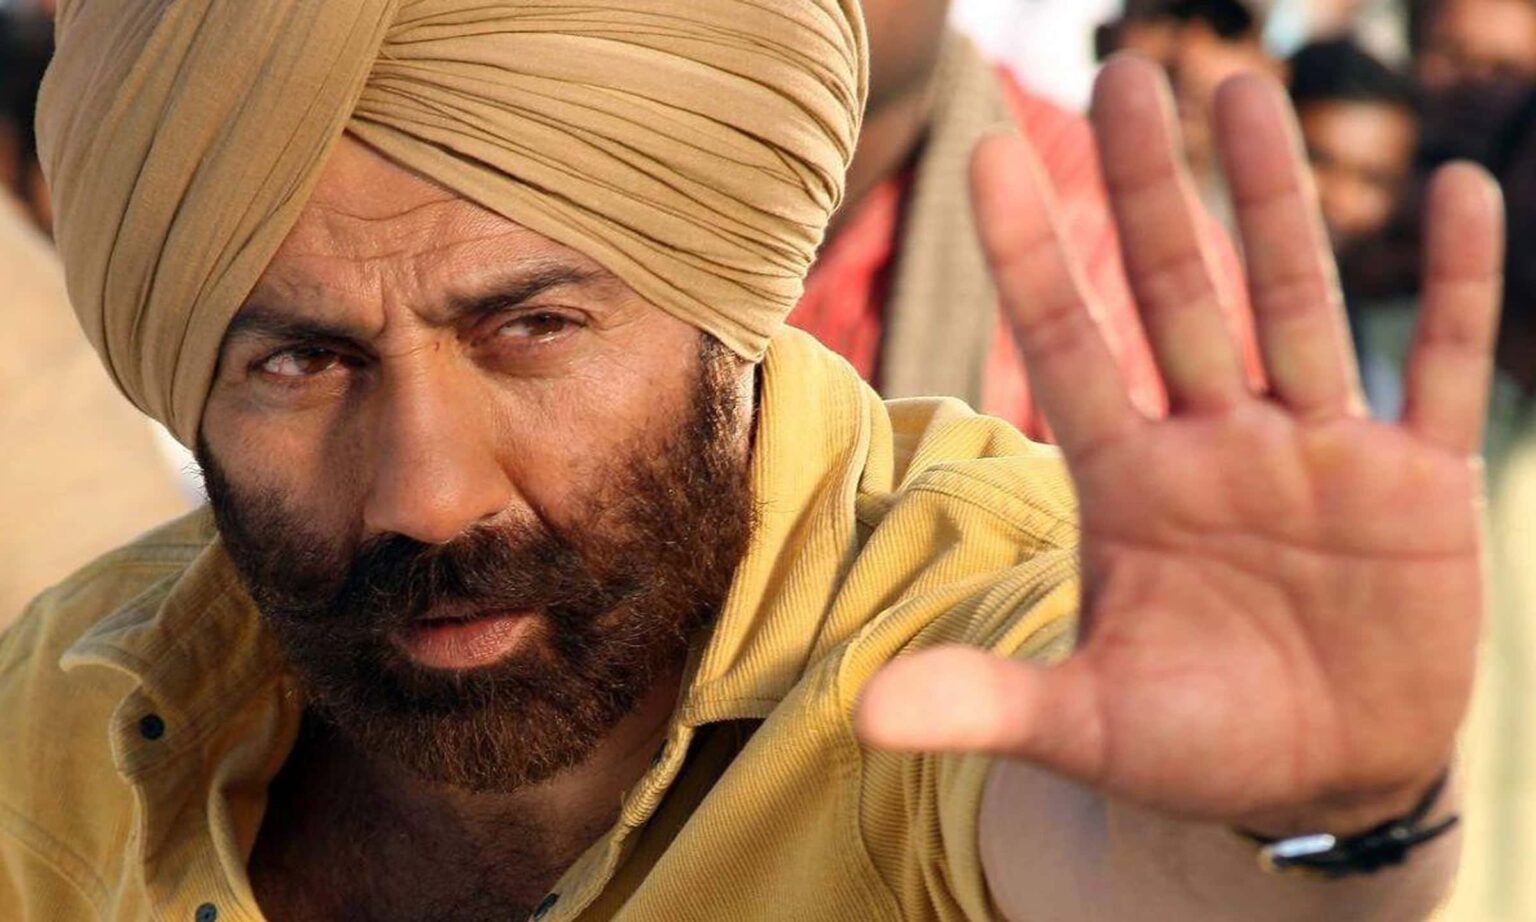 Sunny Deol to reveal about Border 2 to shoot on 2015, but they were scared to start as it flopped back then, as Gadar 2 succeed can be resume.